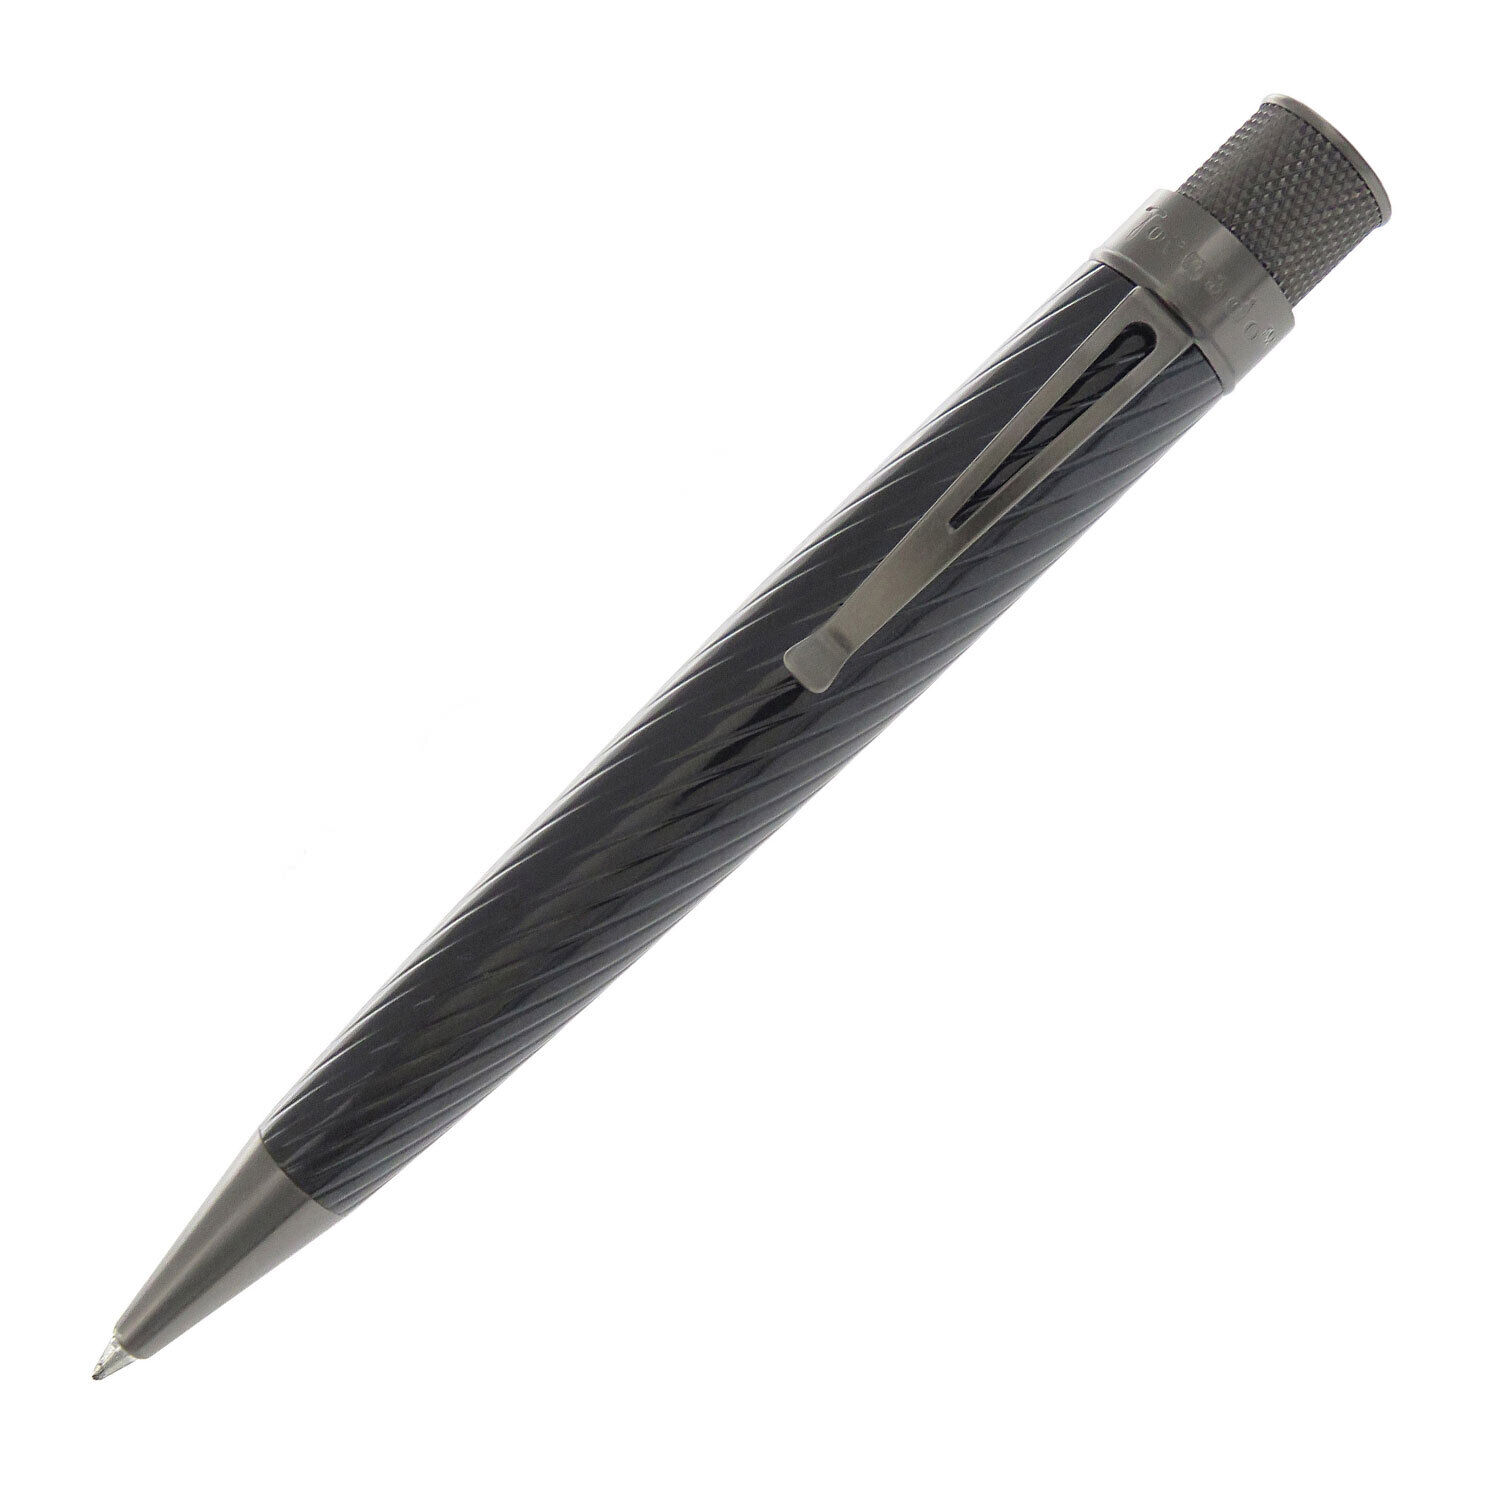 Retro 51 Big Shot Rollerball Pen in Brixton Black - NEW AND SEALED